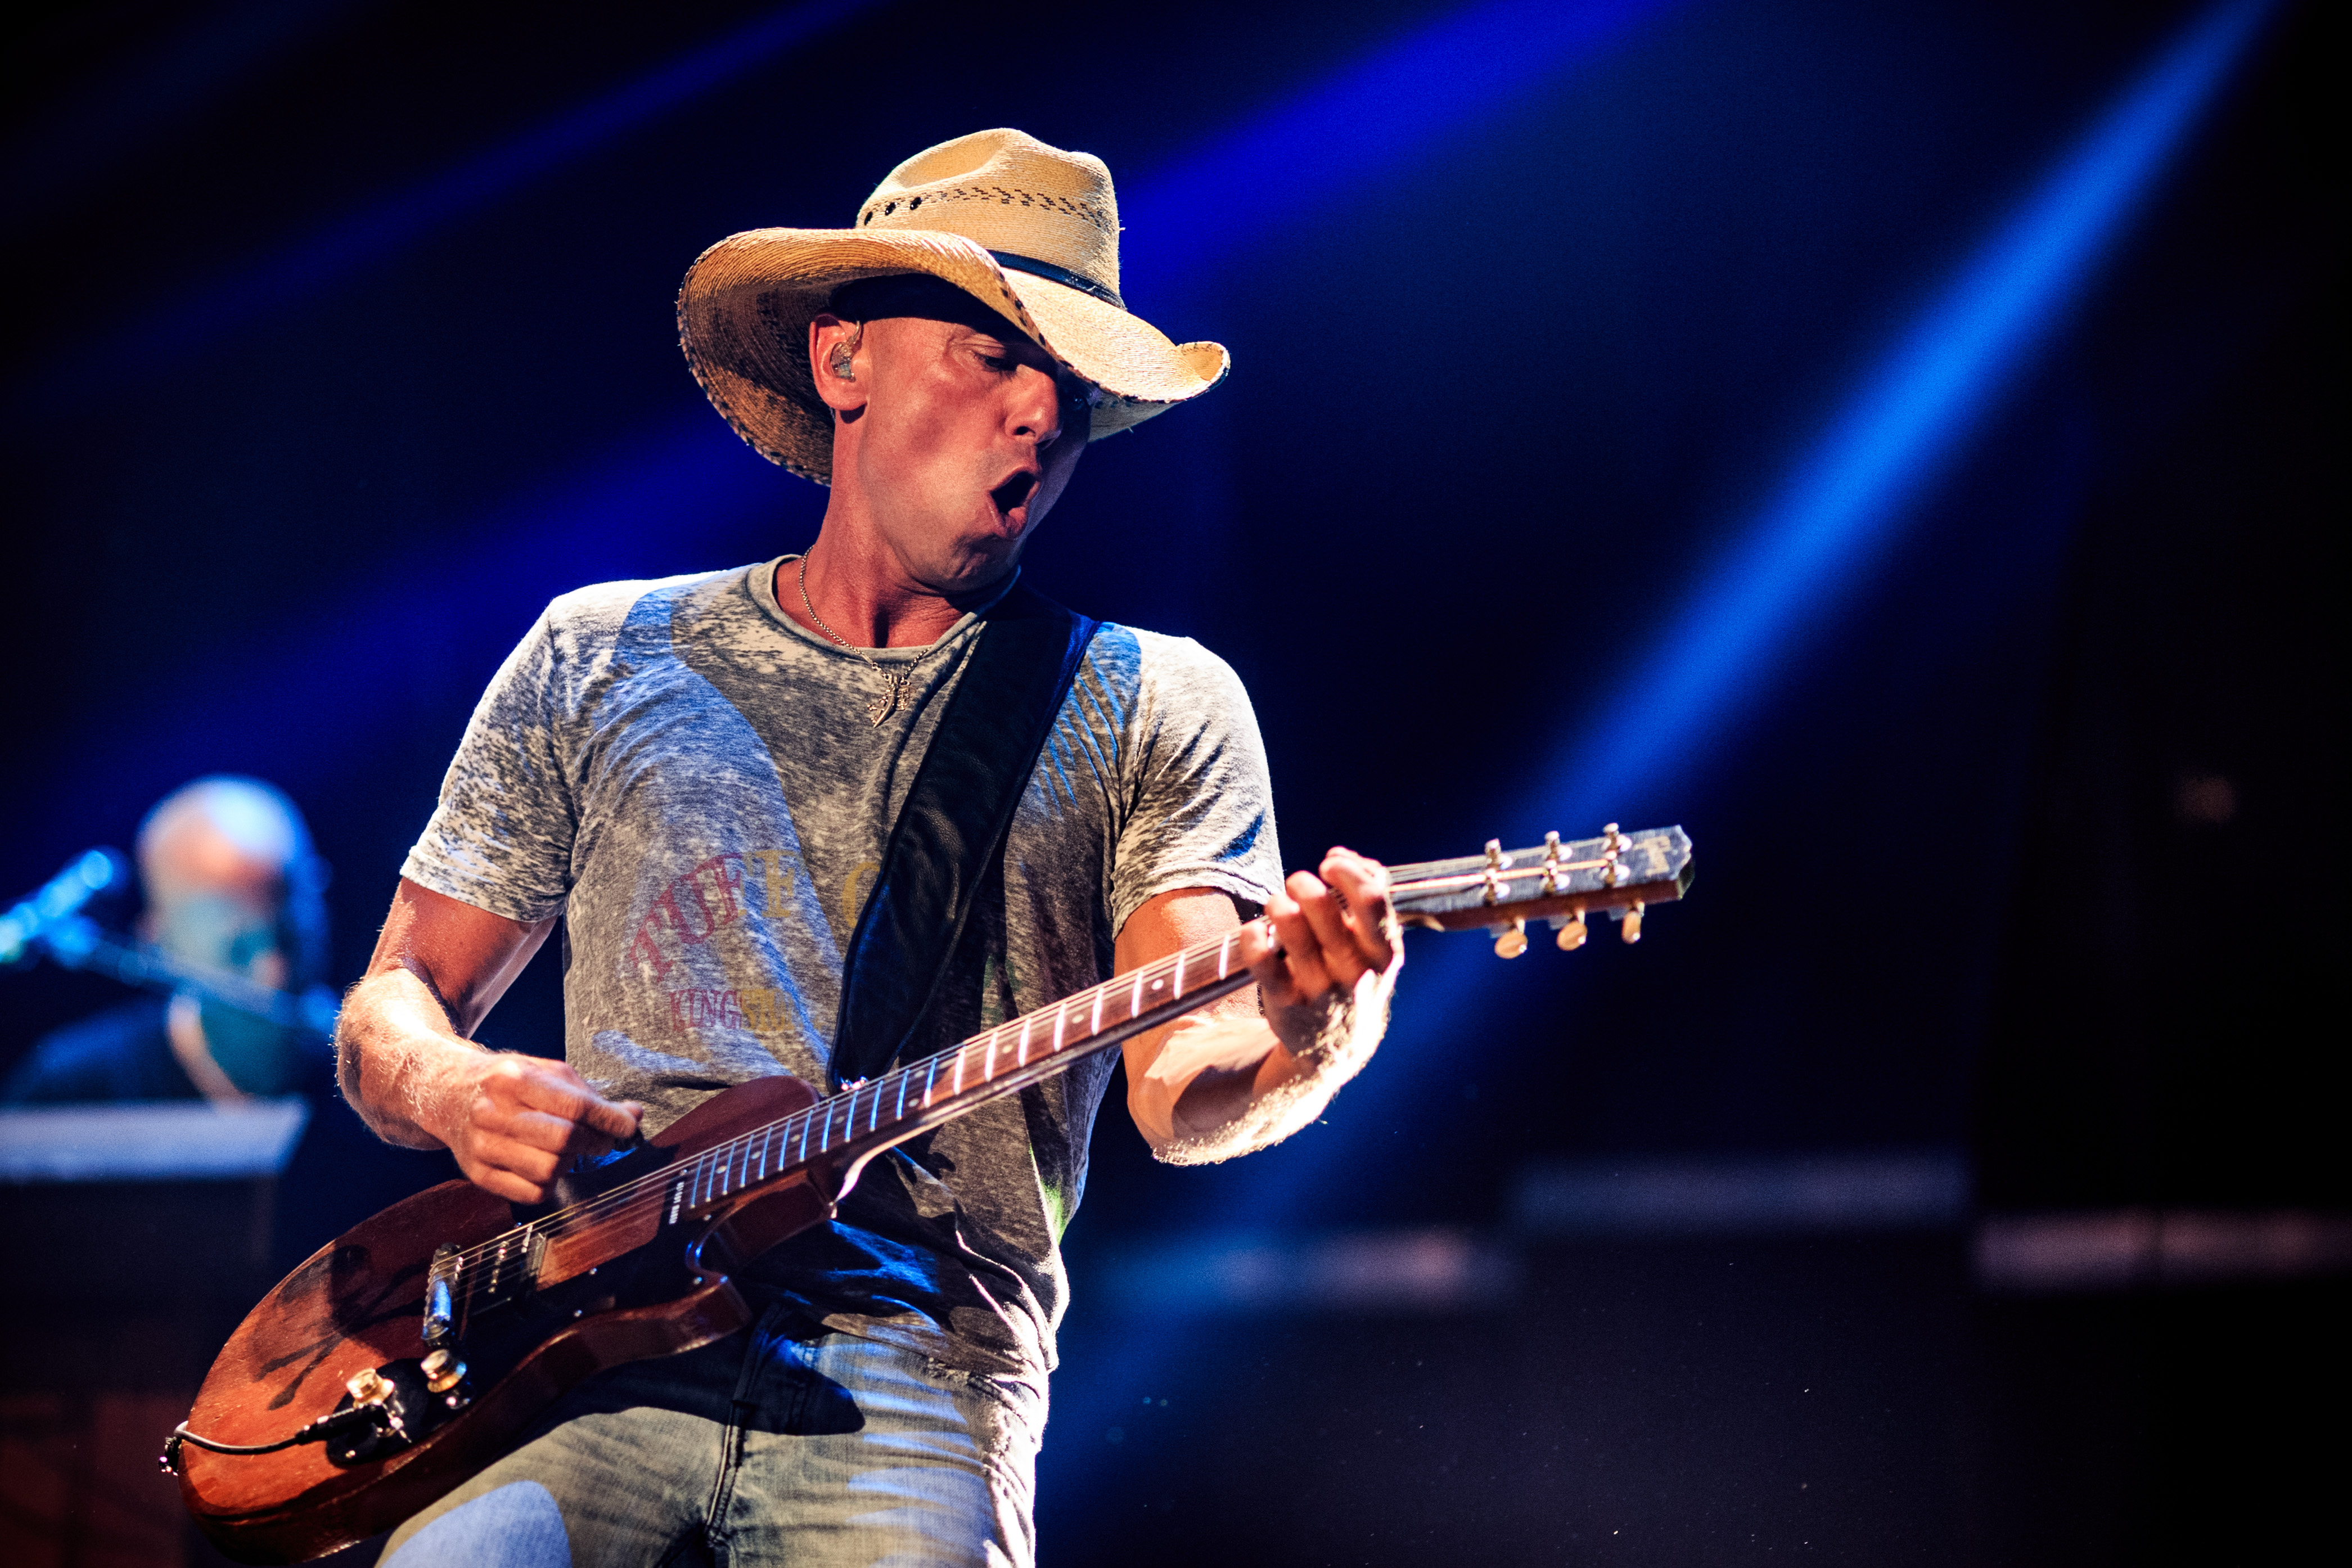 Recording artist Kenny Chesney performs onstage at the 2015 iHeartRadio Music Festival at MGM Grand Garden Arena on September 18, 2015 in Las Vegas, Nevada. (Photo by Christopher Polk/Getty Images for iHeartMedia)